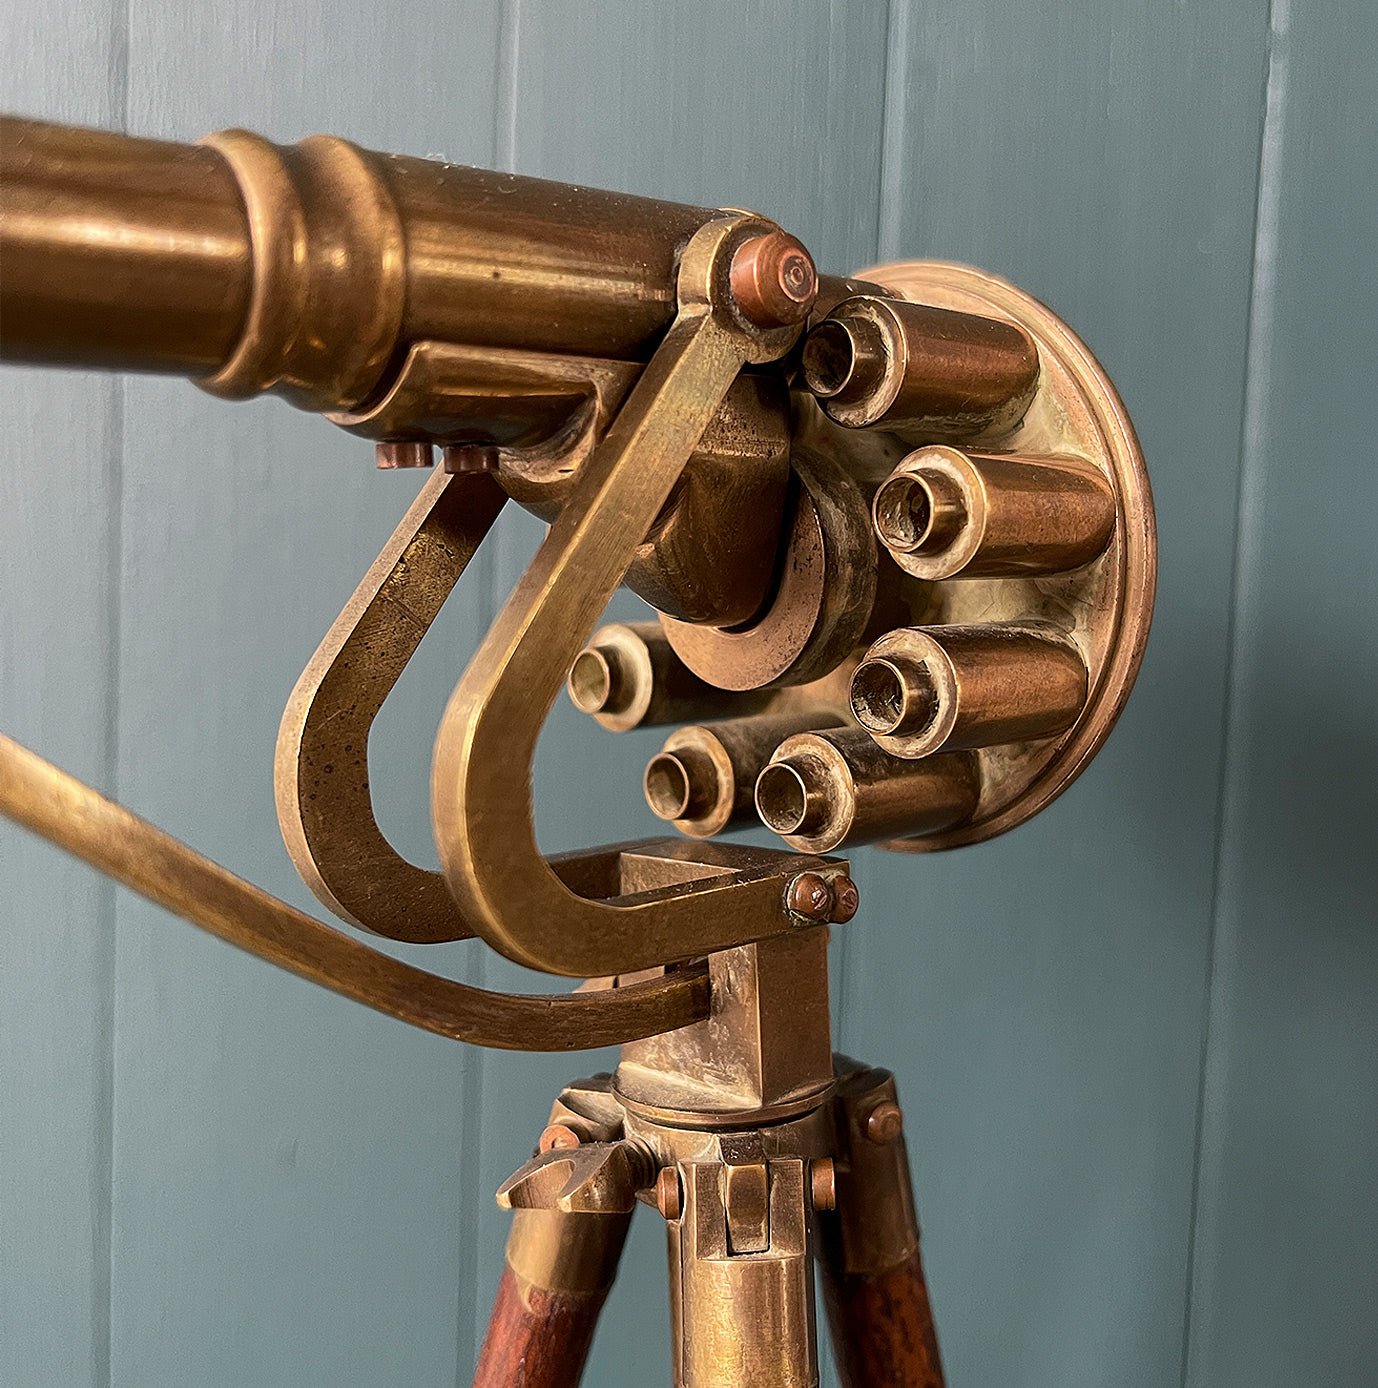 Scratch Built Vintage Brass Model of a Puckle Gun. Fantastically detailed and set on a wooden tripod. Steeped in history with a fantastic story attached to it. Ideal for the study or something for a grand desk - SHOP NOW - www.intovintage.co.uk